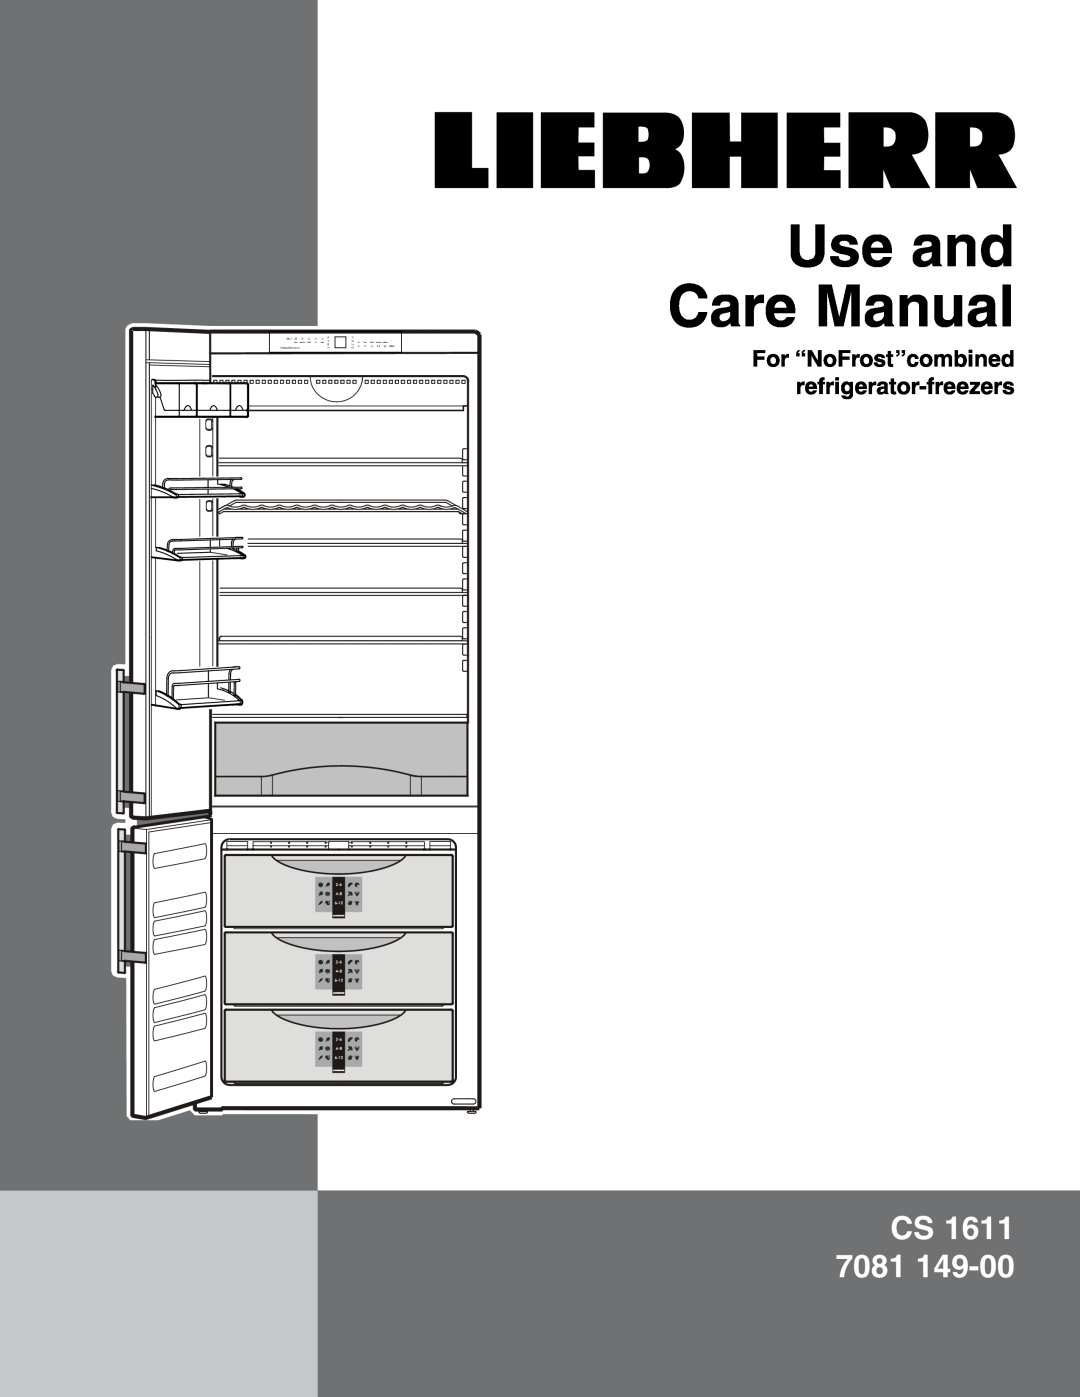 Liebherr CS 1611 7801 149-00 manual Use and Care Manual, CS 1611 7081, For “NoFrost”combined refrigerator-freezers 